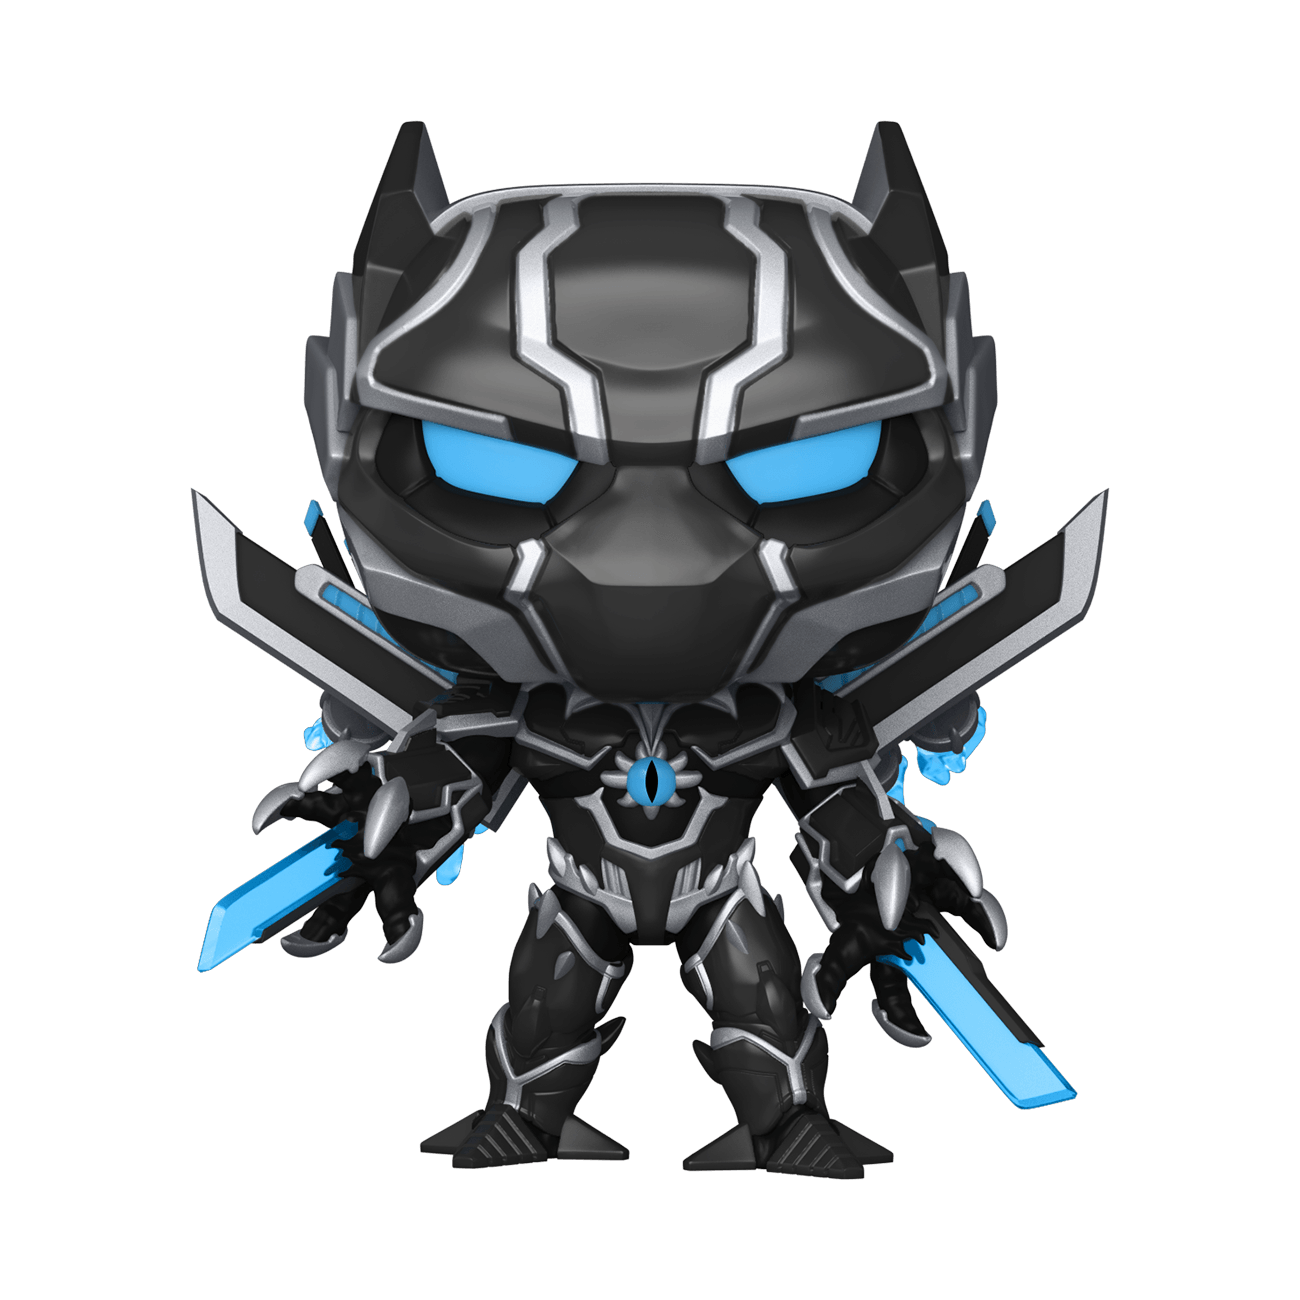 Funko POP! Marvel: Monster Hunters - Black Panther - BumbleToys - 18+, Action Figures, Avengers, Black Panther, Boys, Characters, Funko, Pre-Order